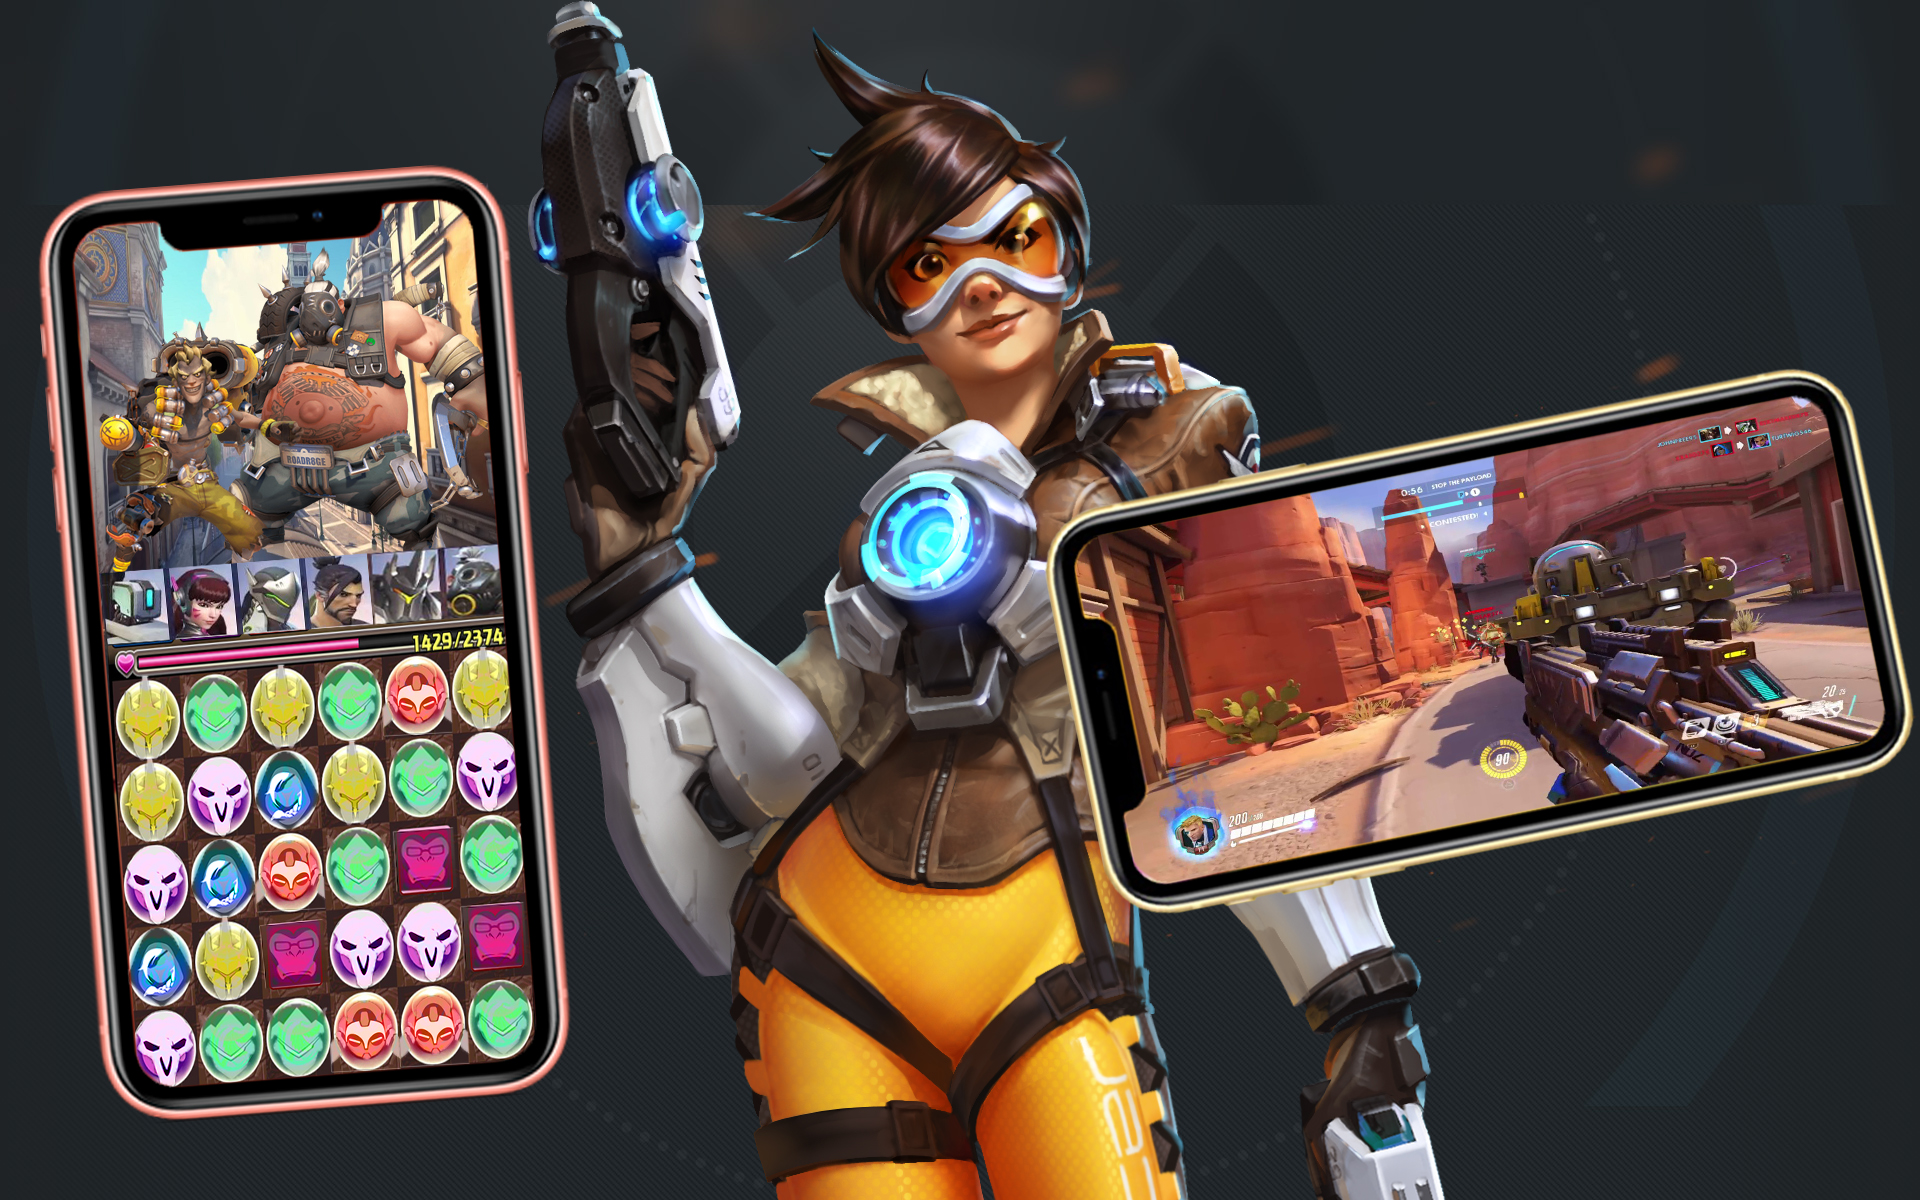 Blizzard Announces New Title OverMatch, And Overwatch Mobile Coming 2019
